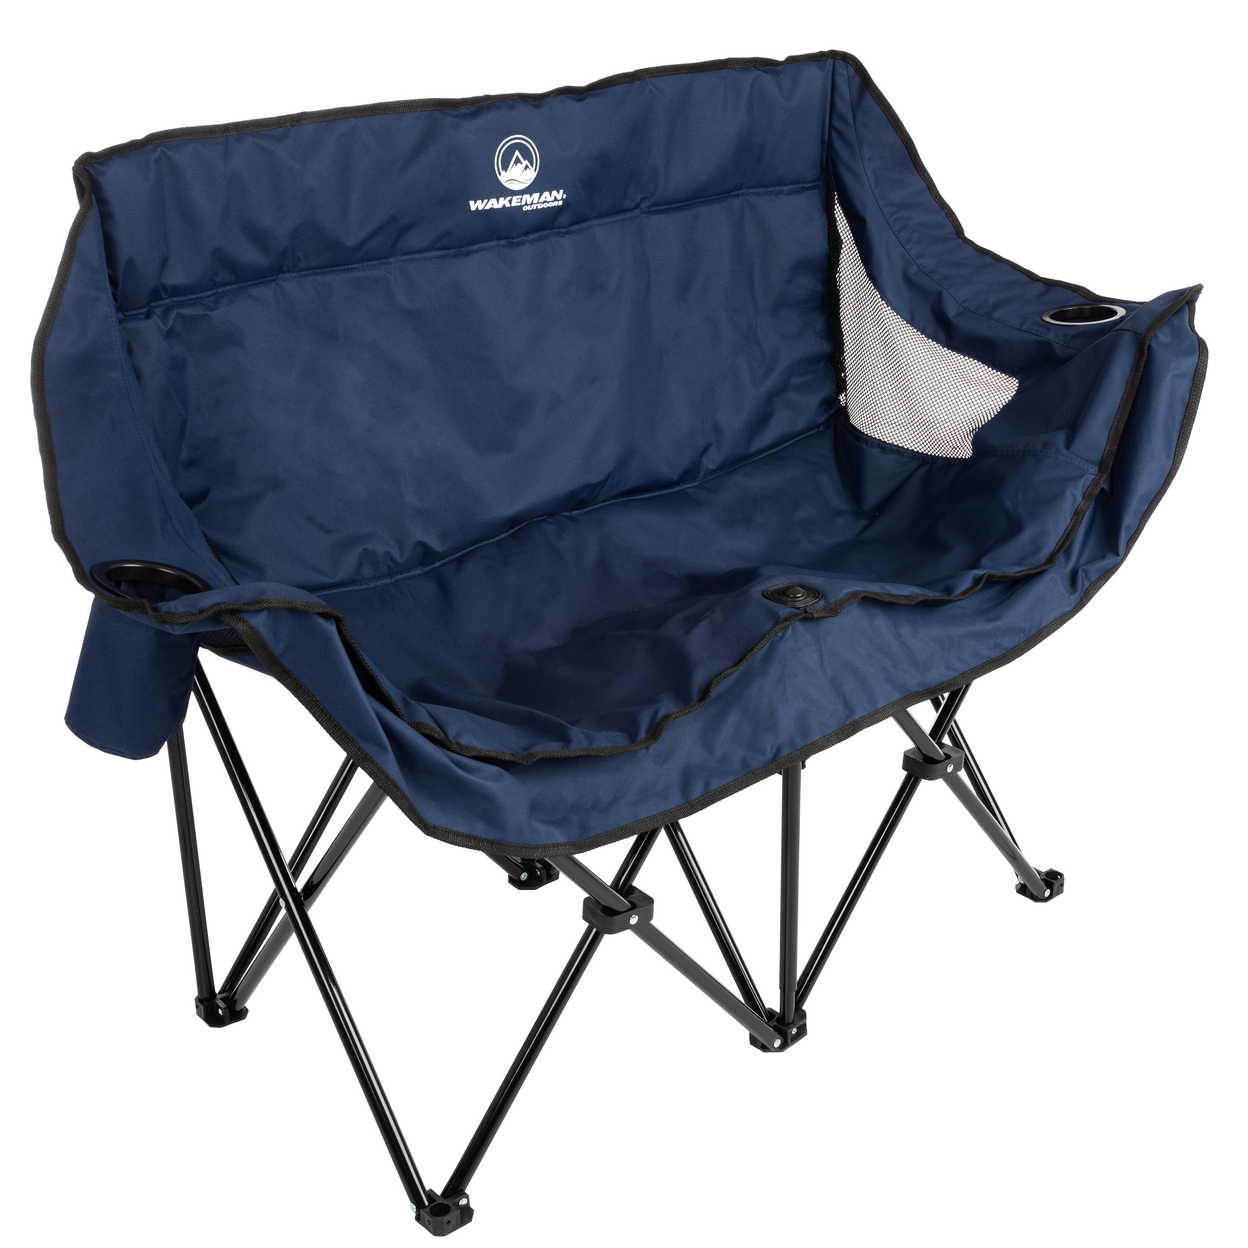 Double Camping Chair - Foldable Portable Couch With 2 Cupholders And Padded Seats Blue